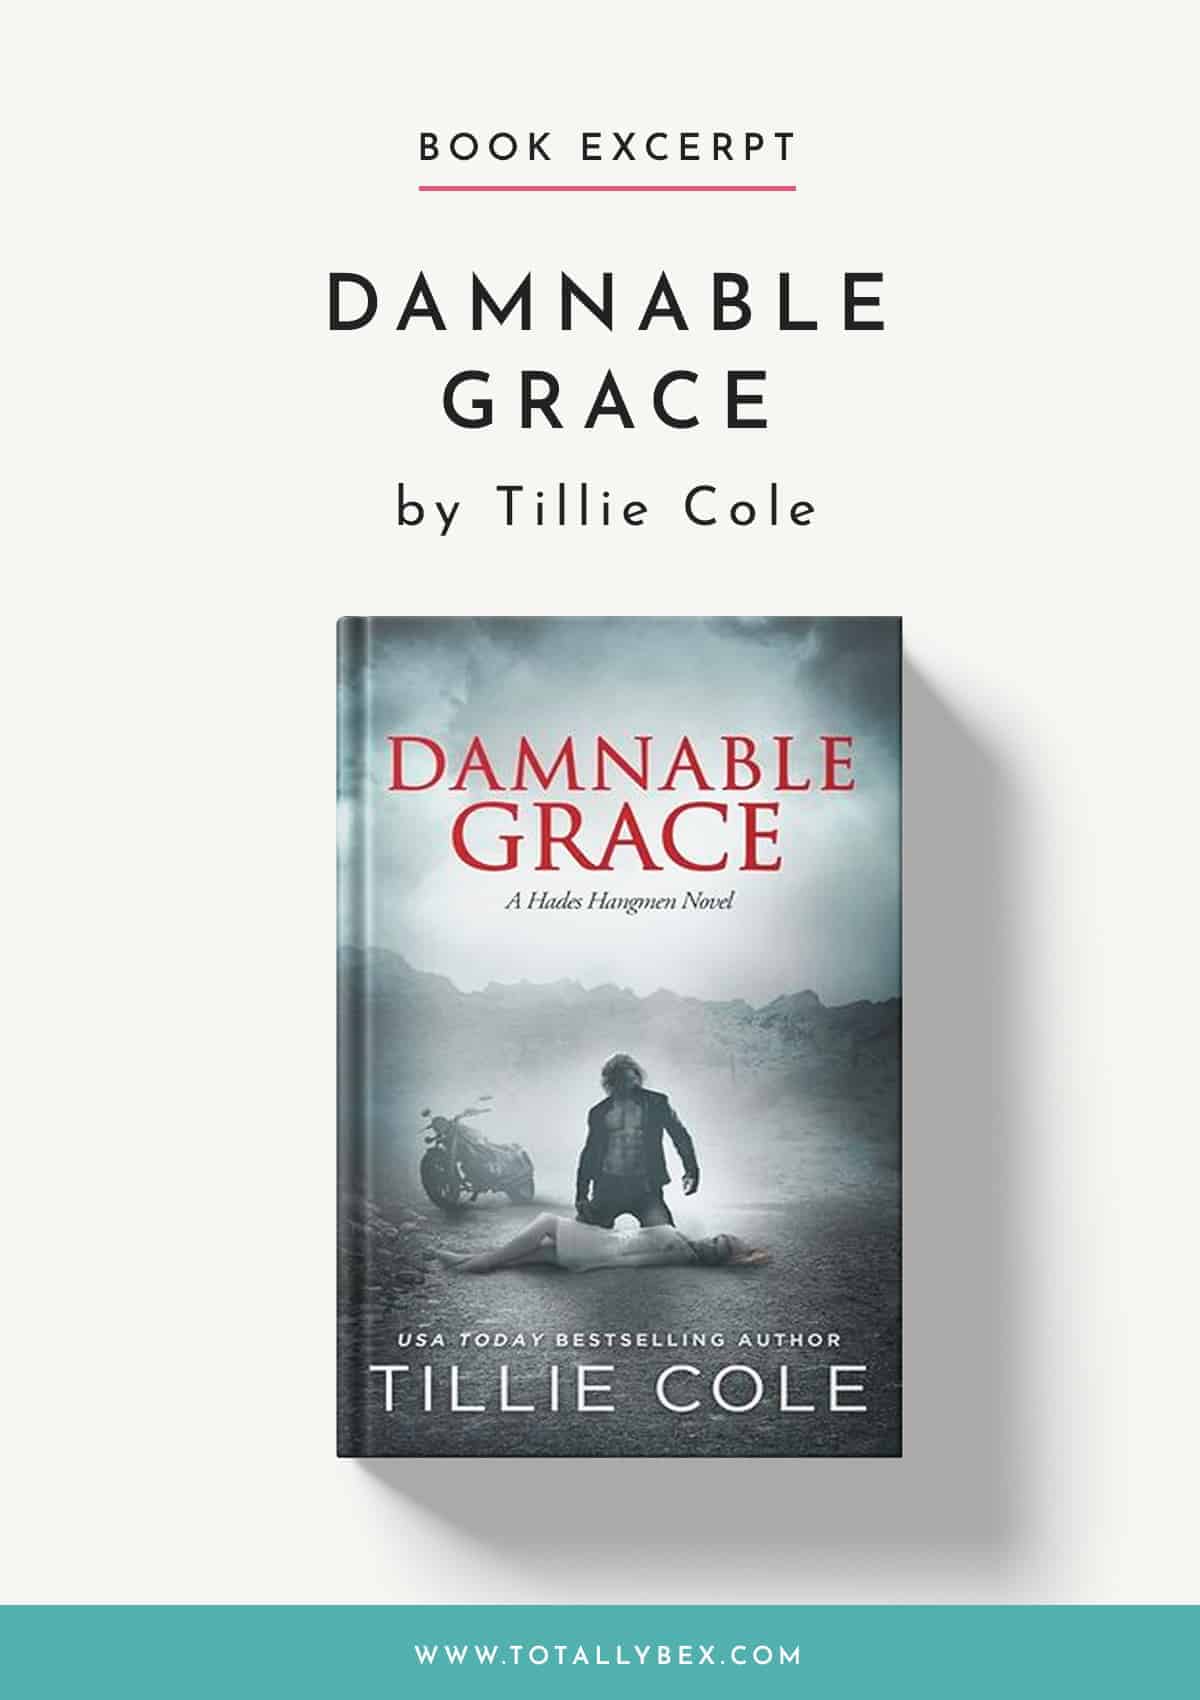 Damnable Grace by Tillie Cole is the fifth book in the Hades Hangmen series and is Phebe and AK's story. Enjoy this excerpt and grab your copy!